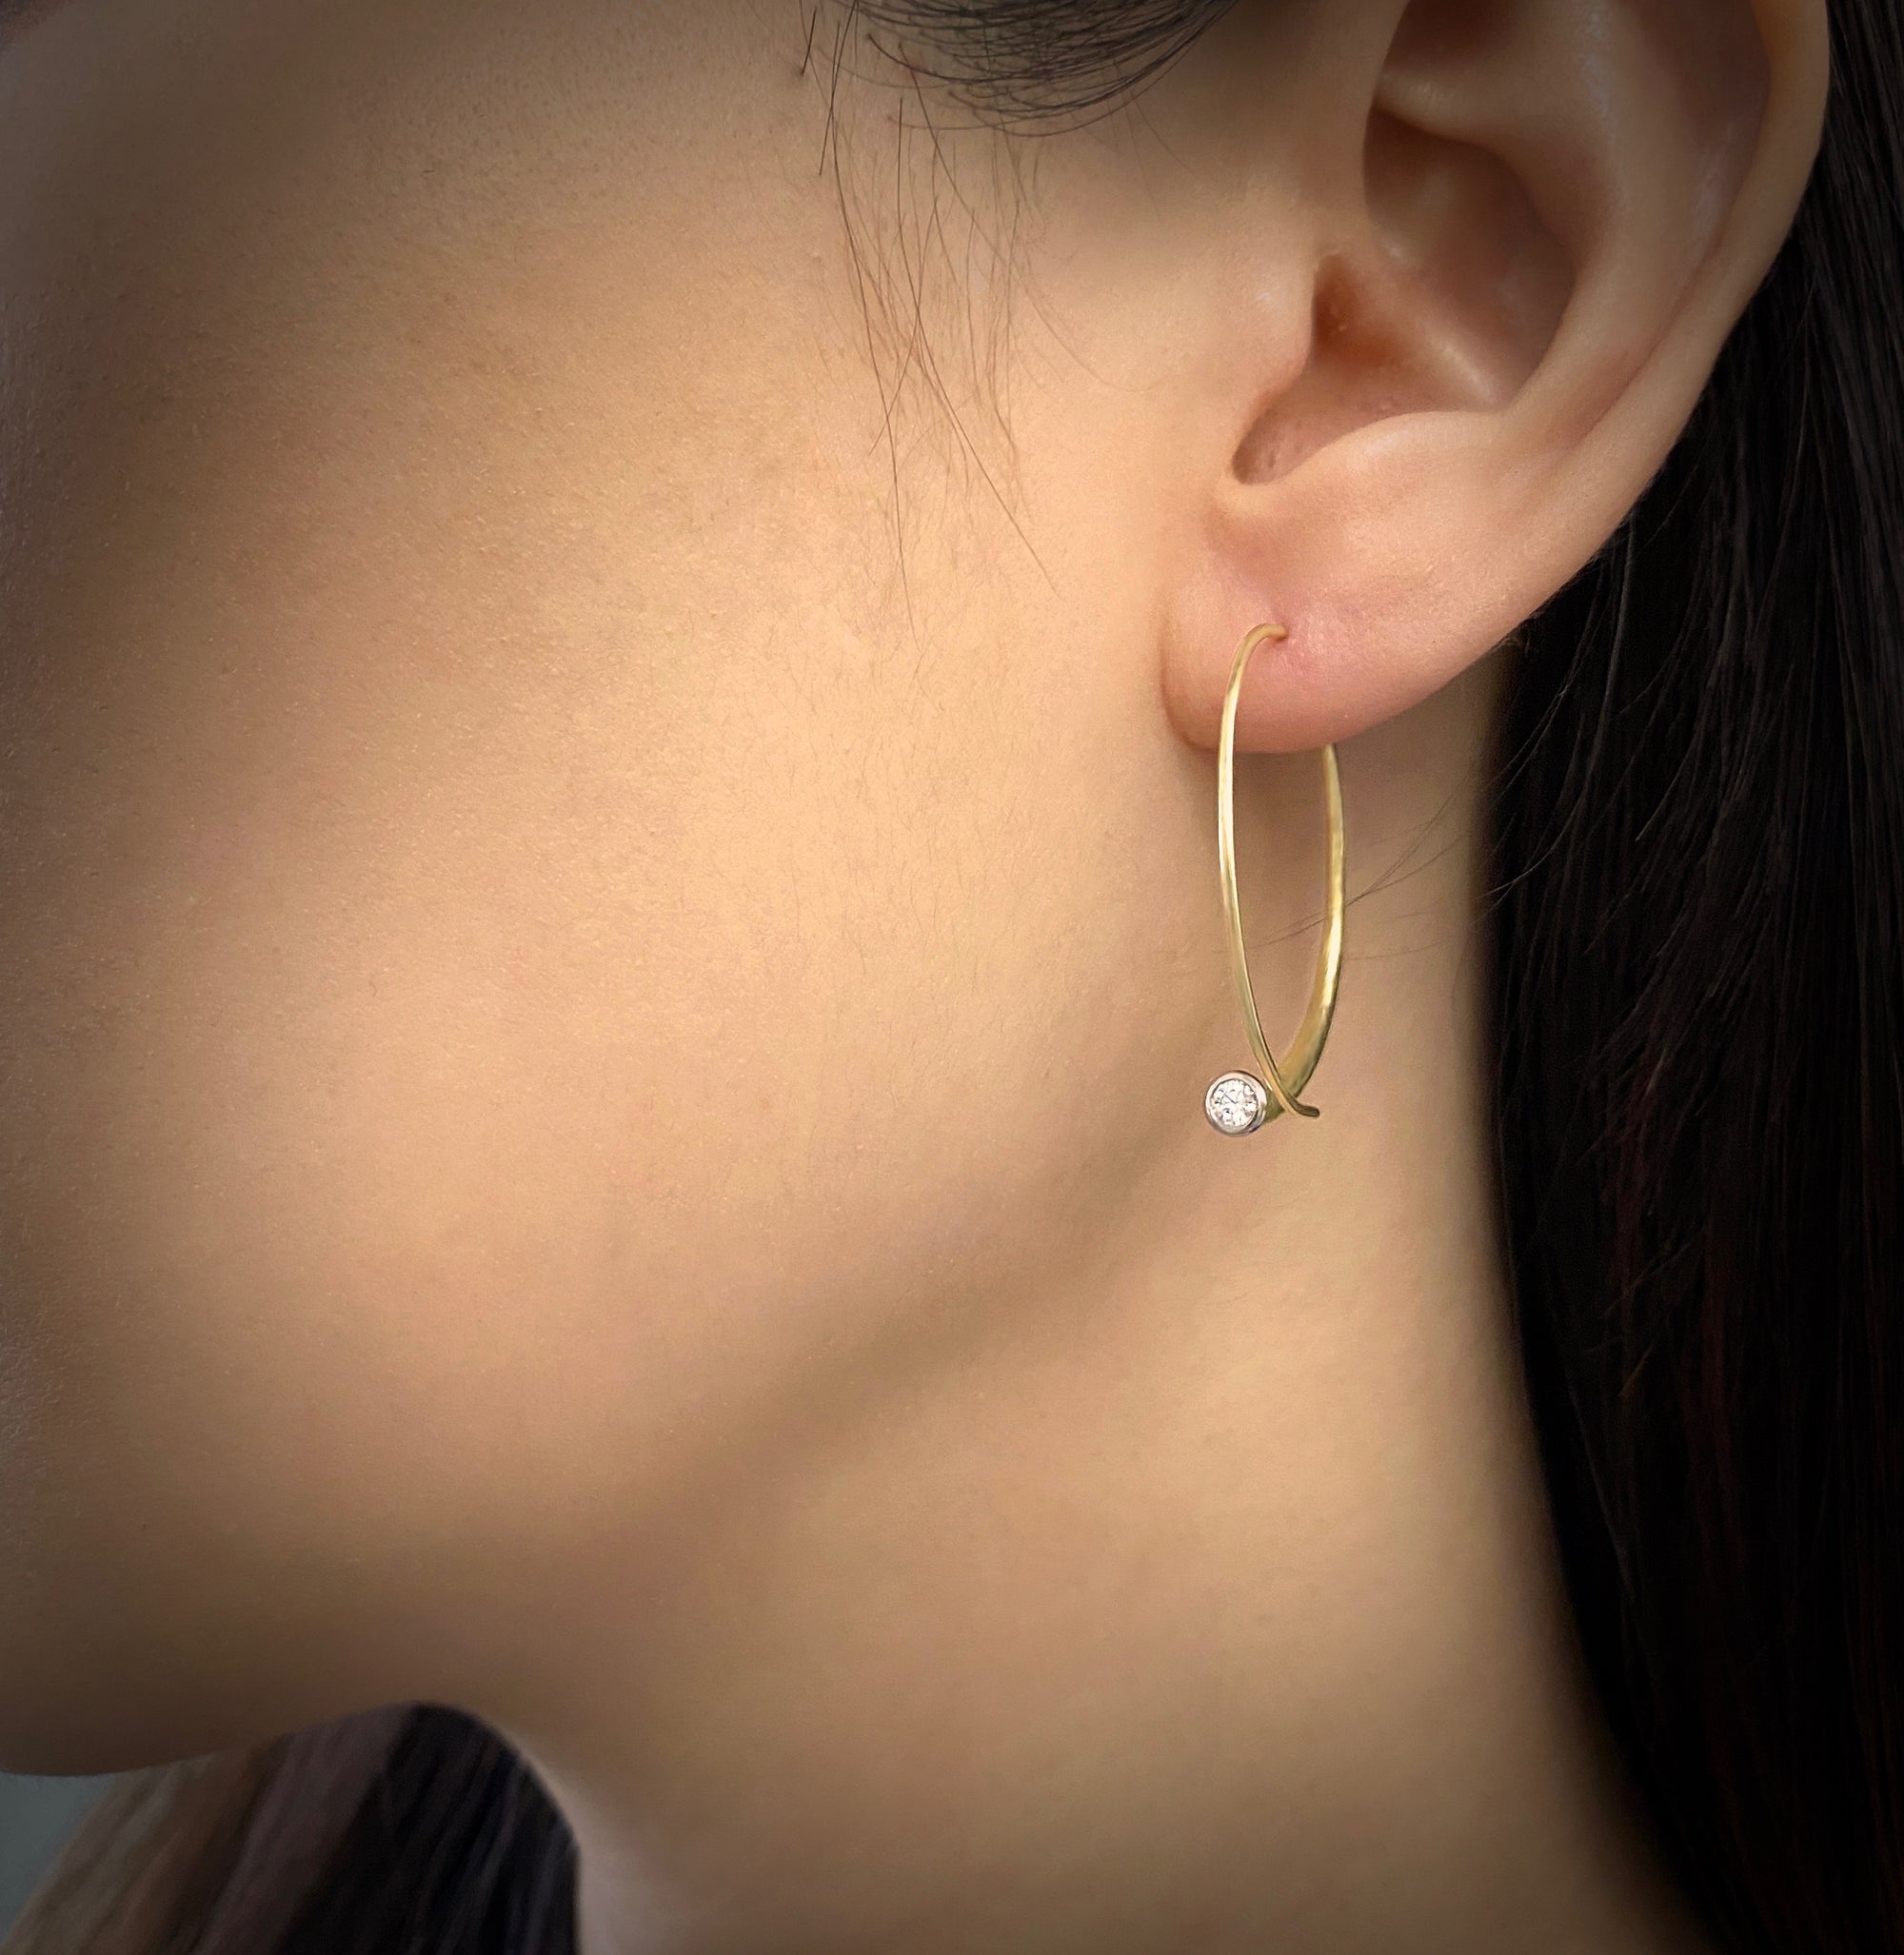 Vortex oval Hoop Earrings in 18K yellow gold or platinum and lab diamonds made by Ayesha Mayadas